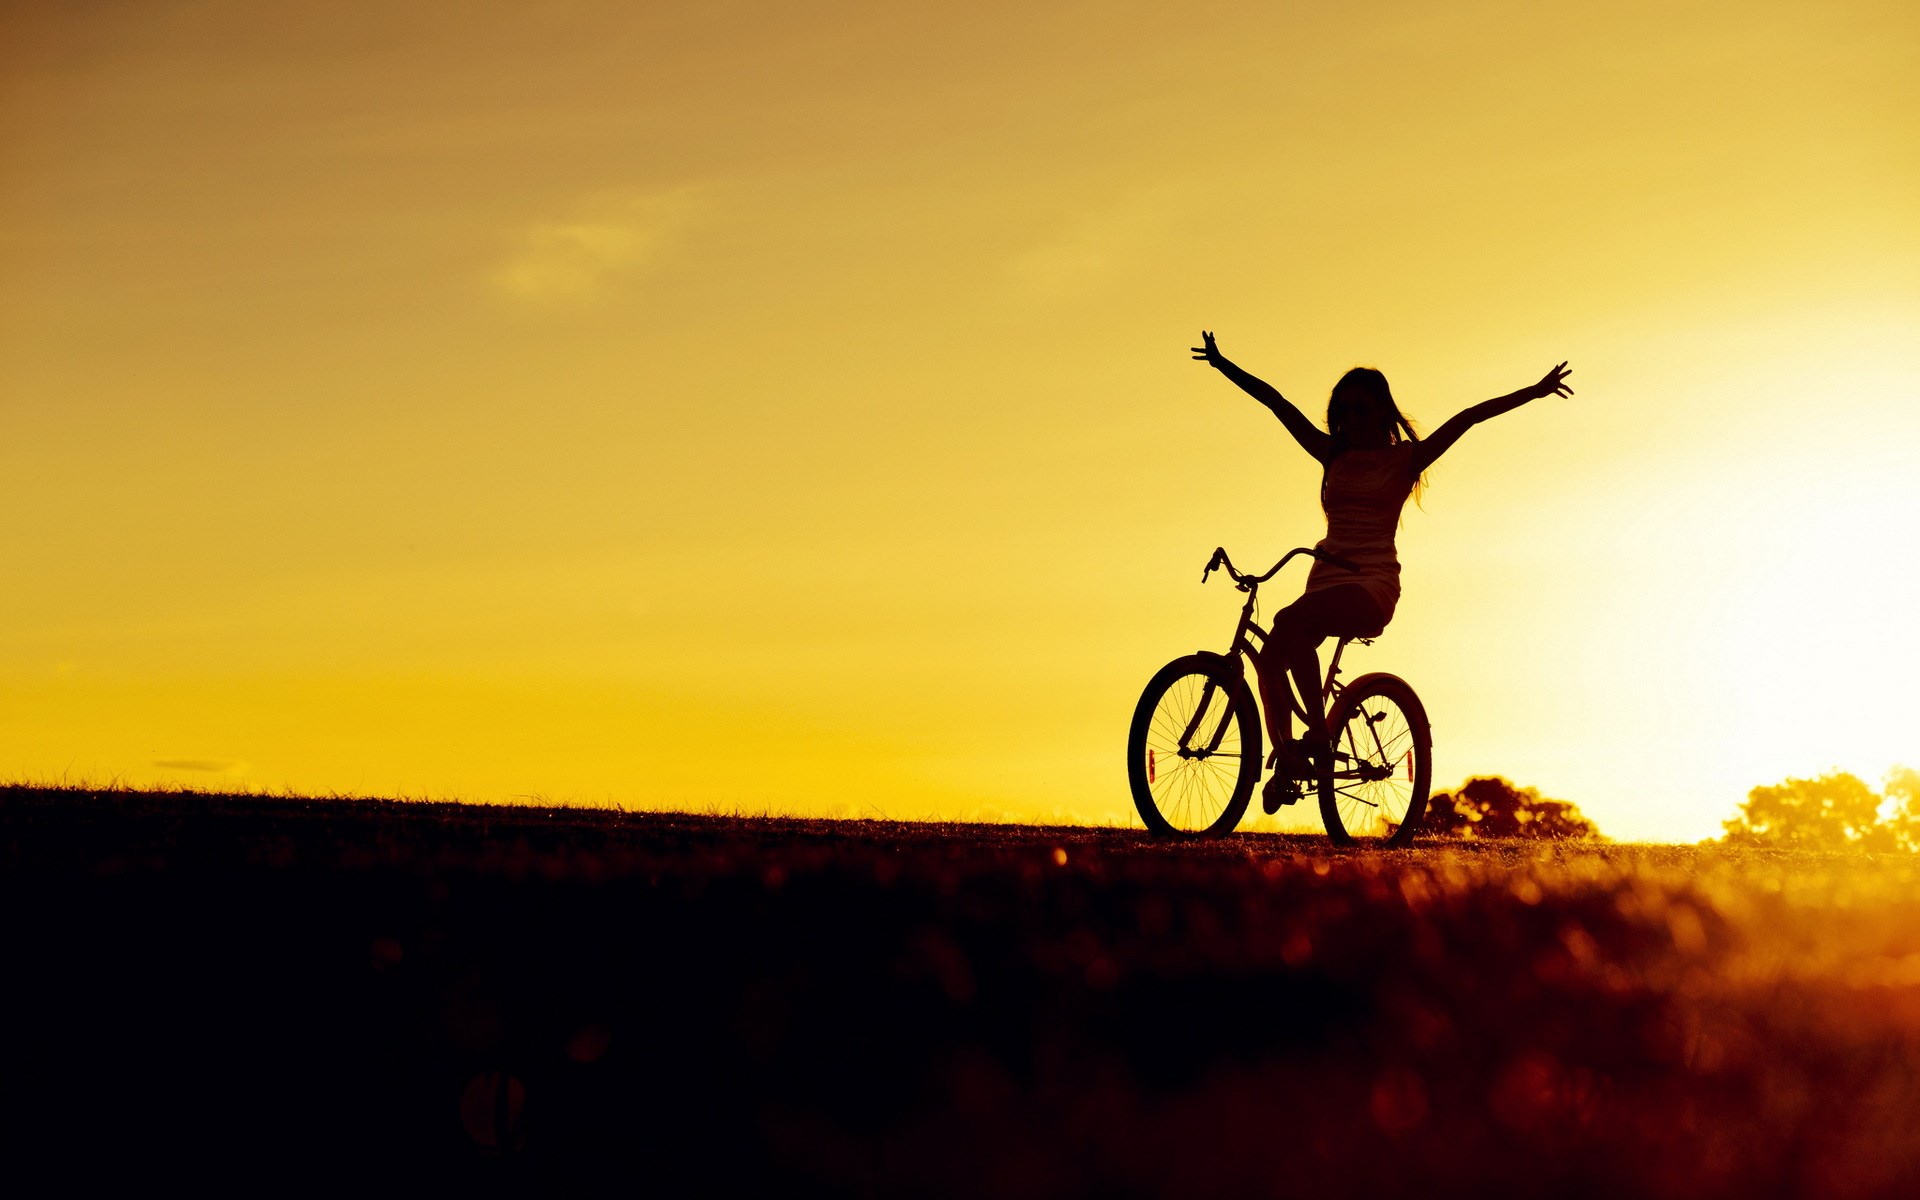 be free wallpaper,sky,cycling,bicycle,yellow,vehicle